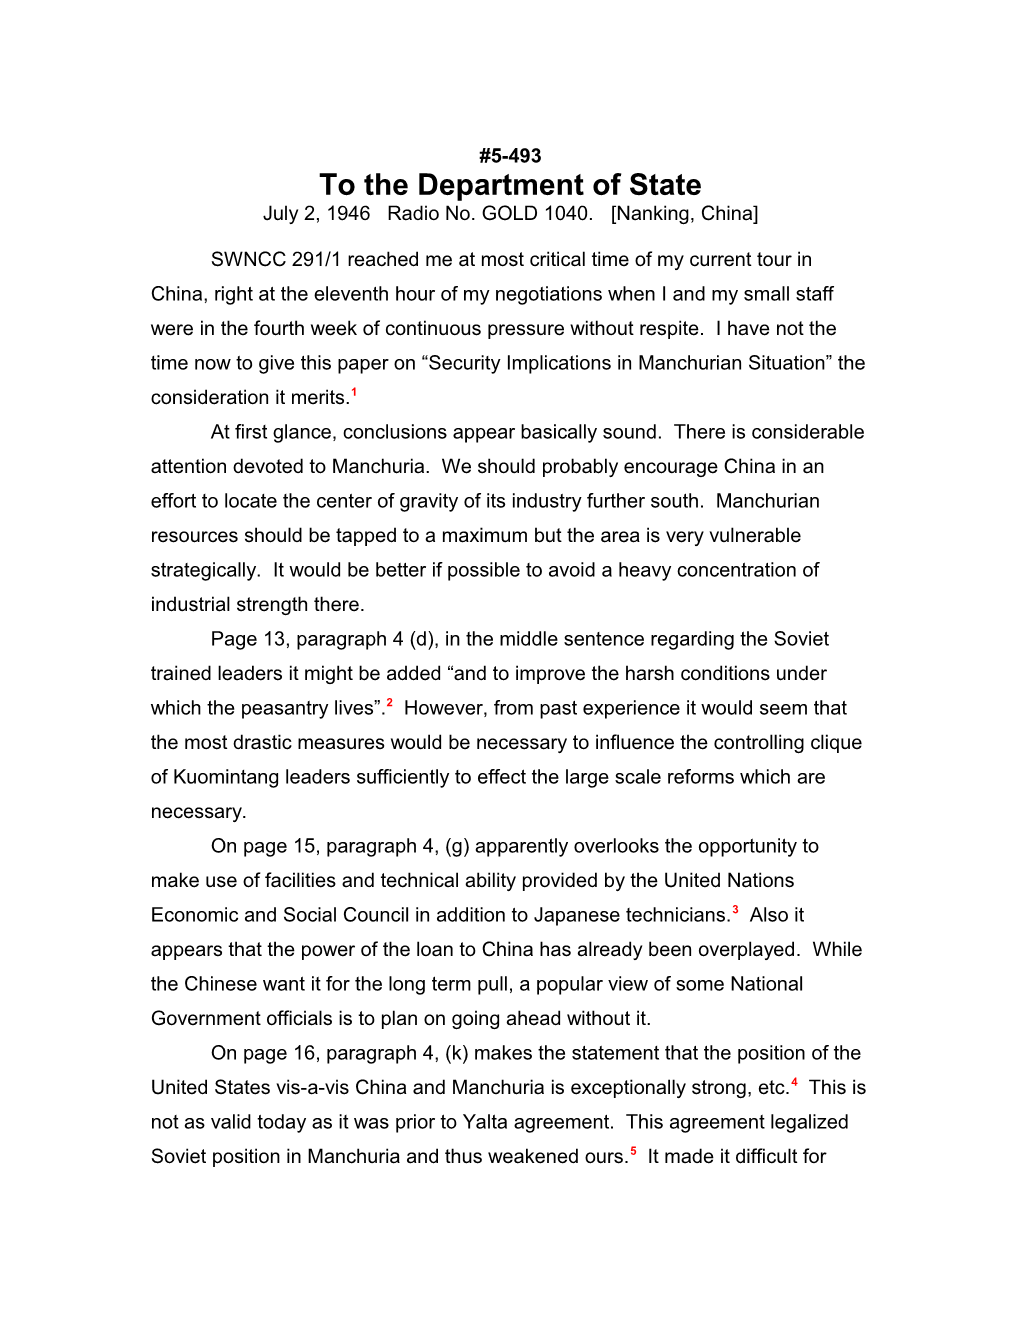 To the Department of State